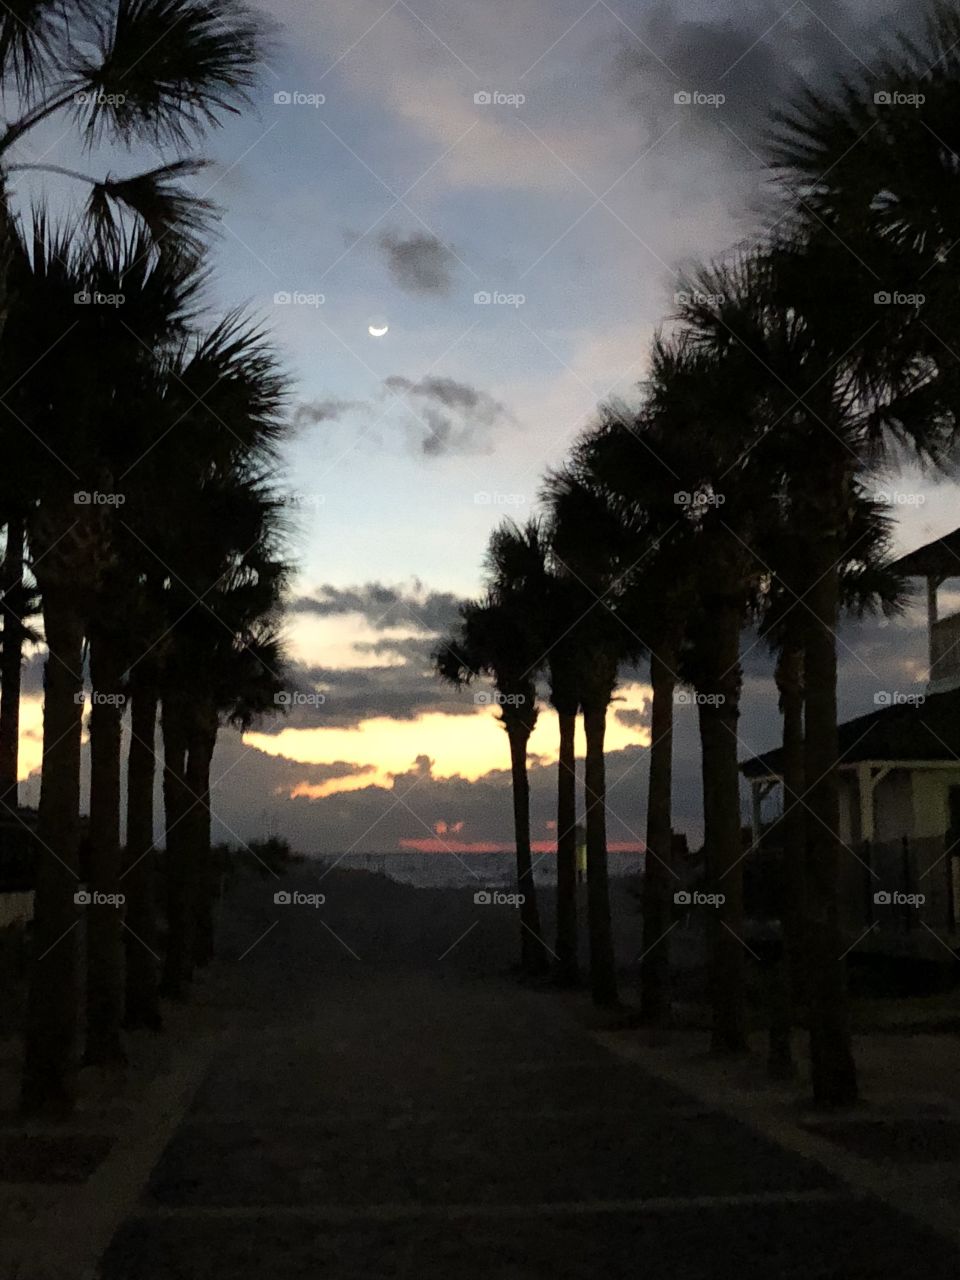 Beach sunrise with a crescent moon and palm trees